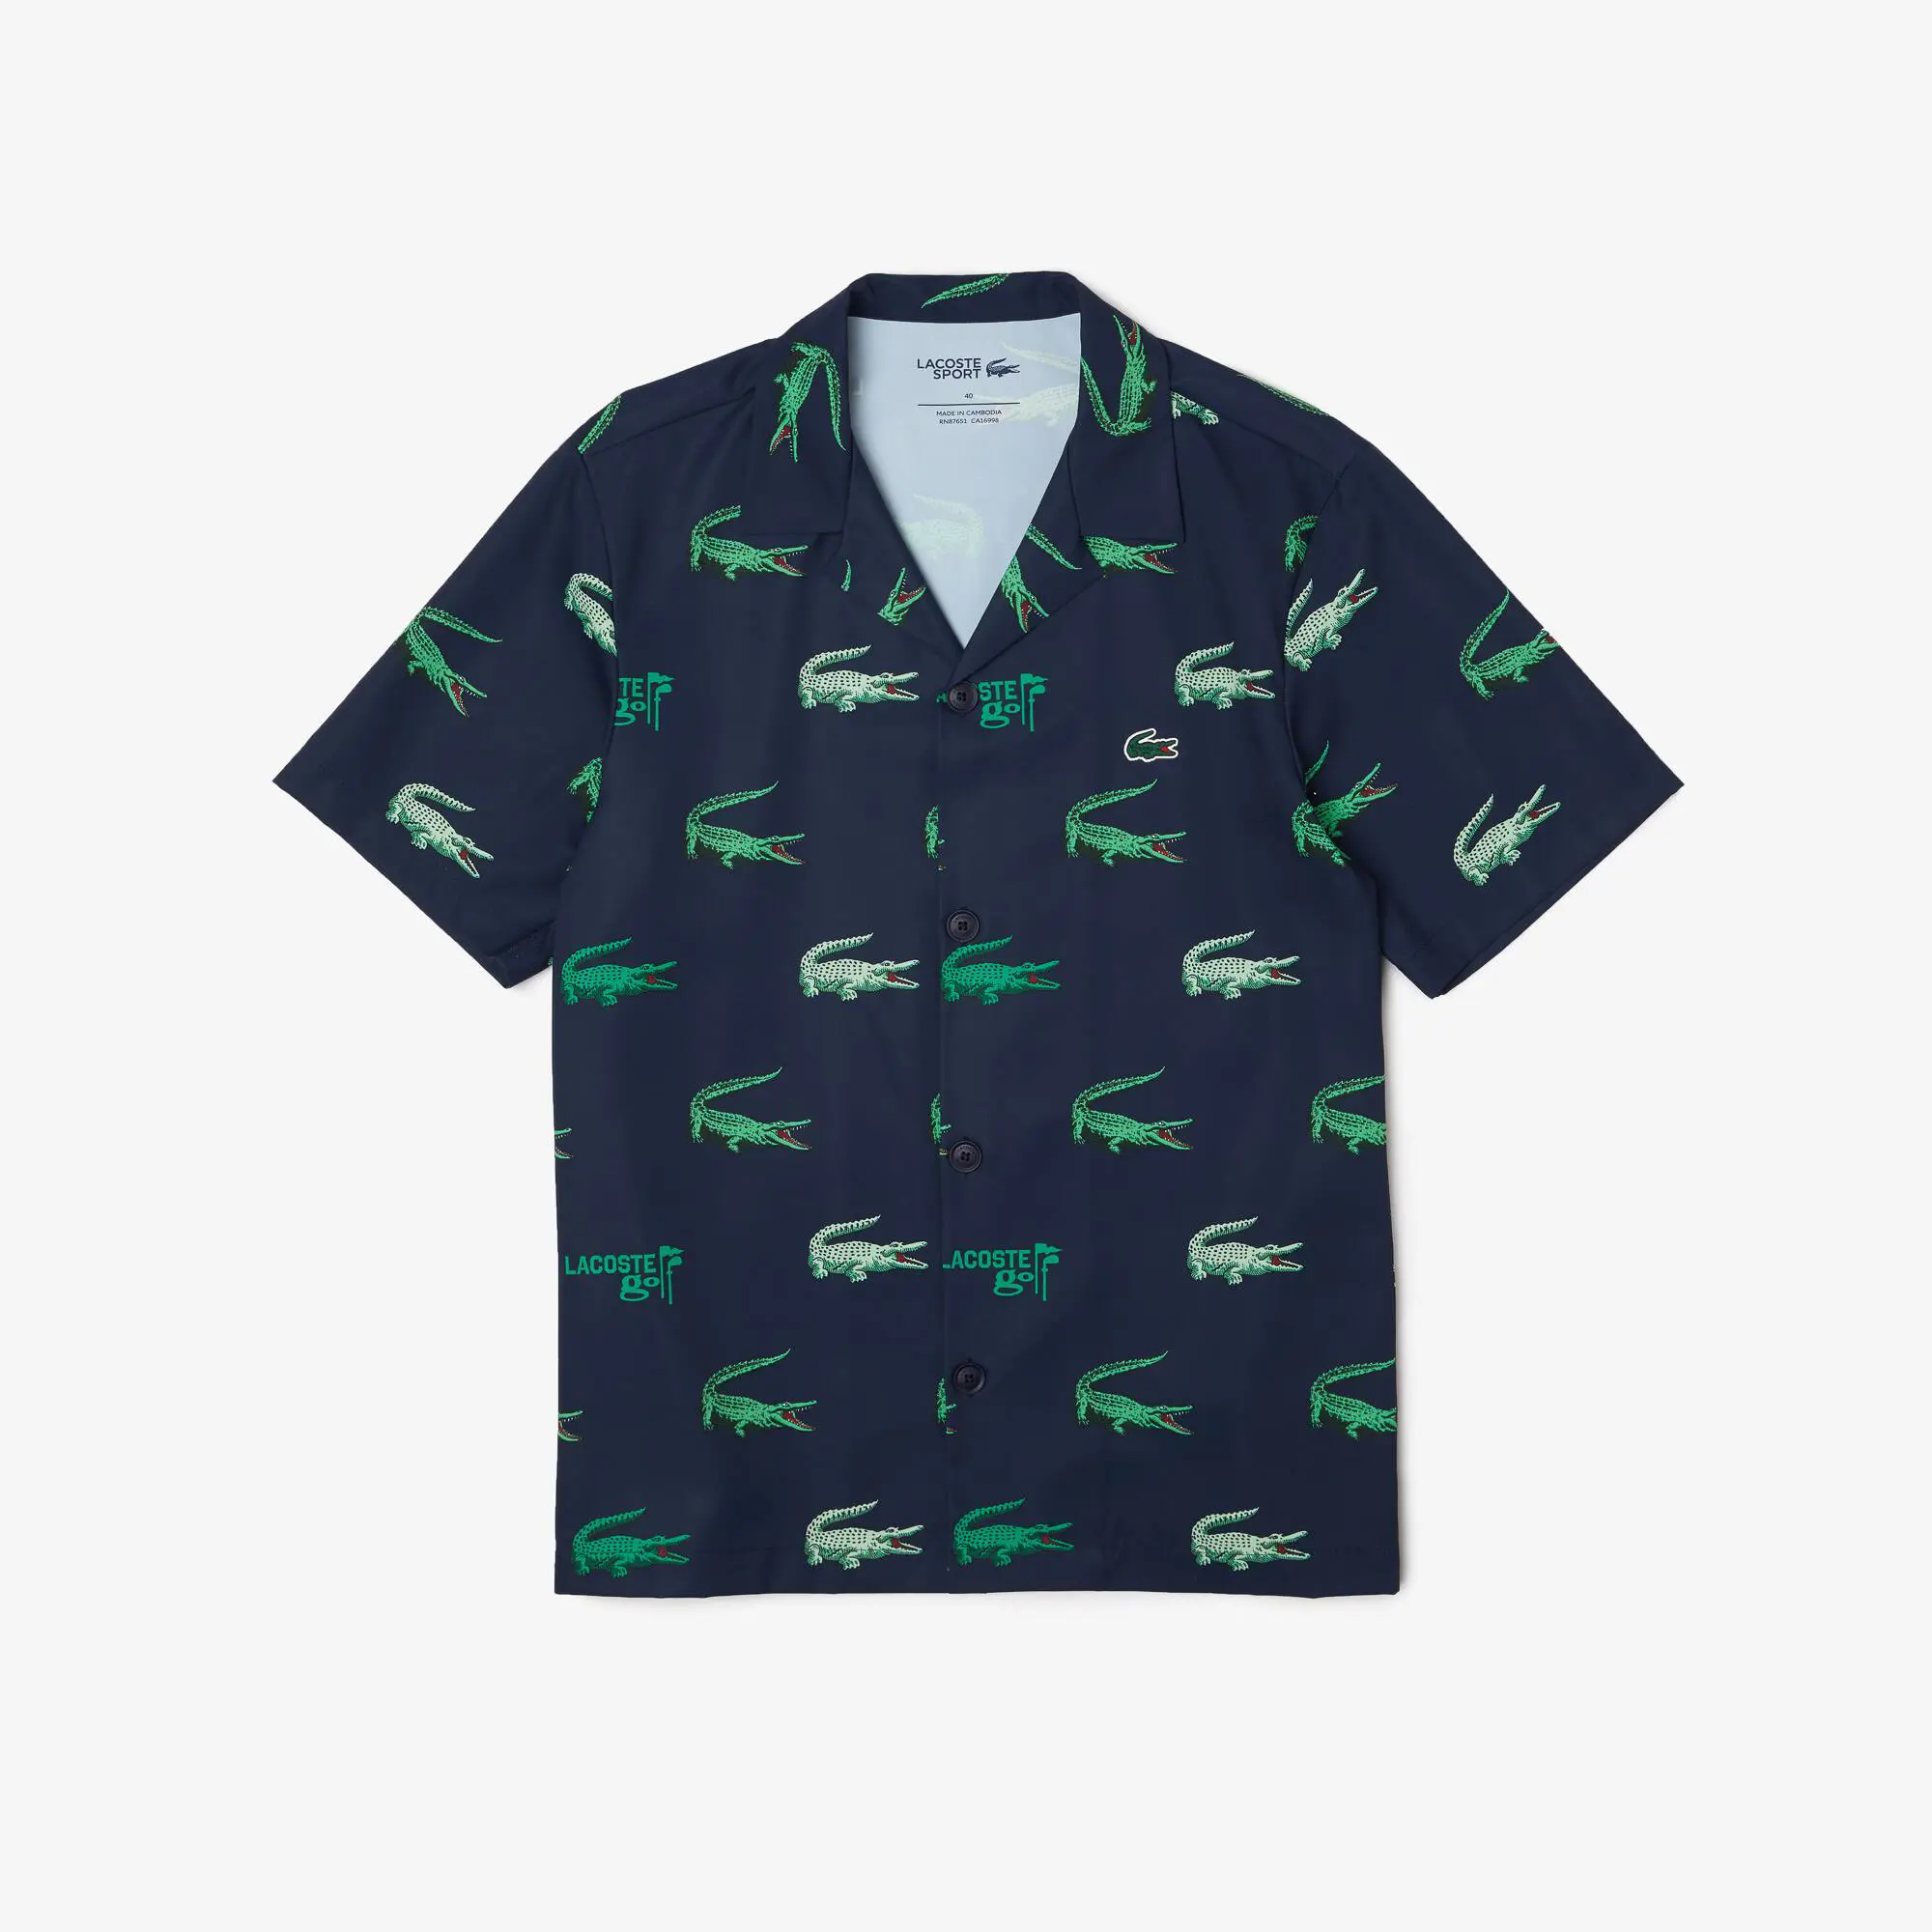 Lacoste Men’s Lacoste Golf Printed Short-Sleeved Shirt. 2